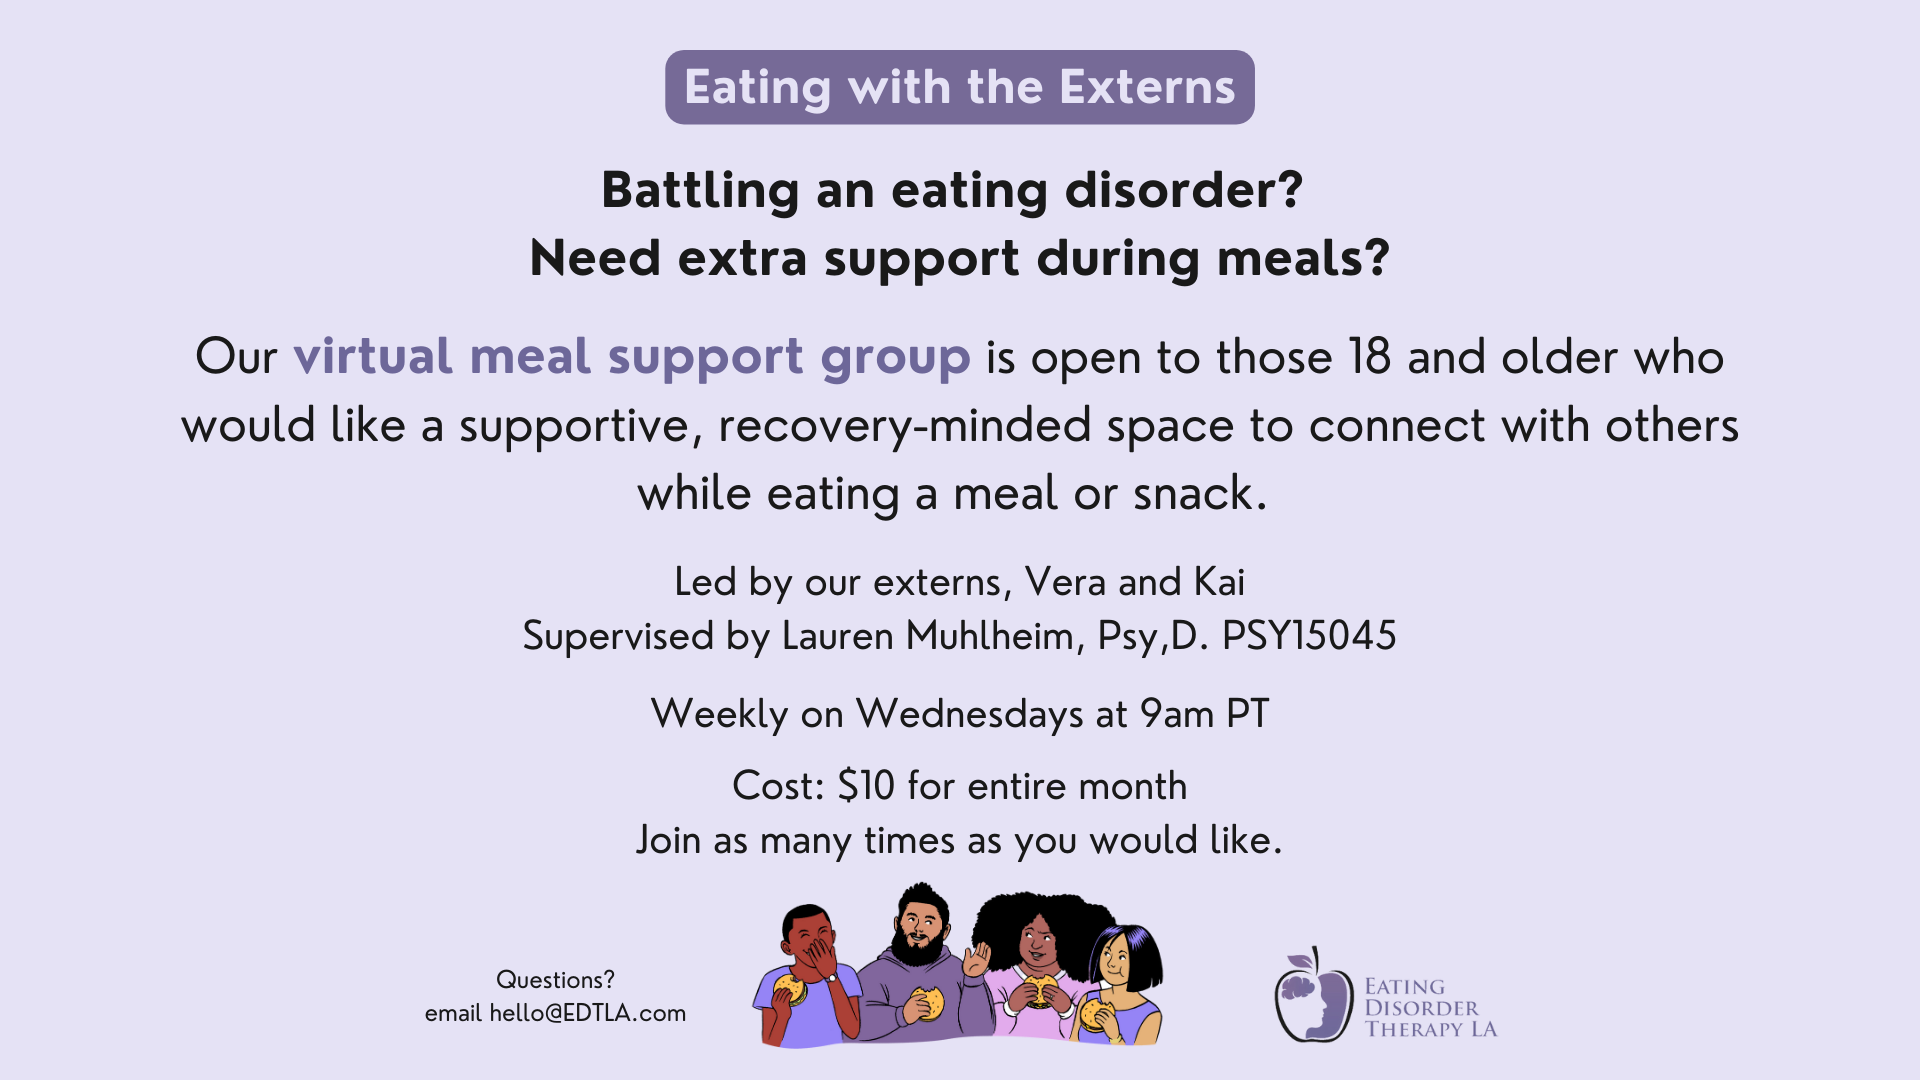 Battling an eating disorder? Need extra support during meals? Our virtual meal support group is open to those 18 and older who would like a supportive, recovery-minded space to connect with others while eating a meal or snack. Led by our externs, Vera and Kai Supervised by Lauren Muhlheim, Psy,D. PSY15045 Weekly on Wednesdays at 9am PT Cost: $10 for entire month Join as many times as you would like. Questions? Email hello@edtla.com.